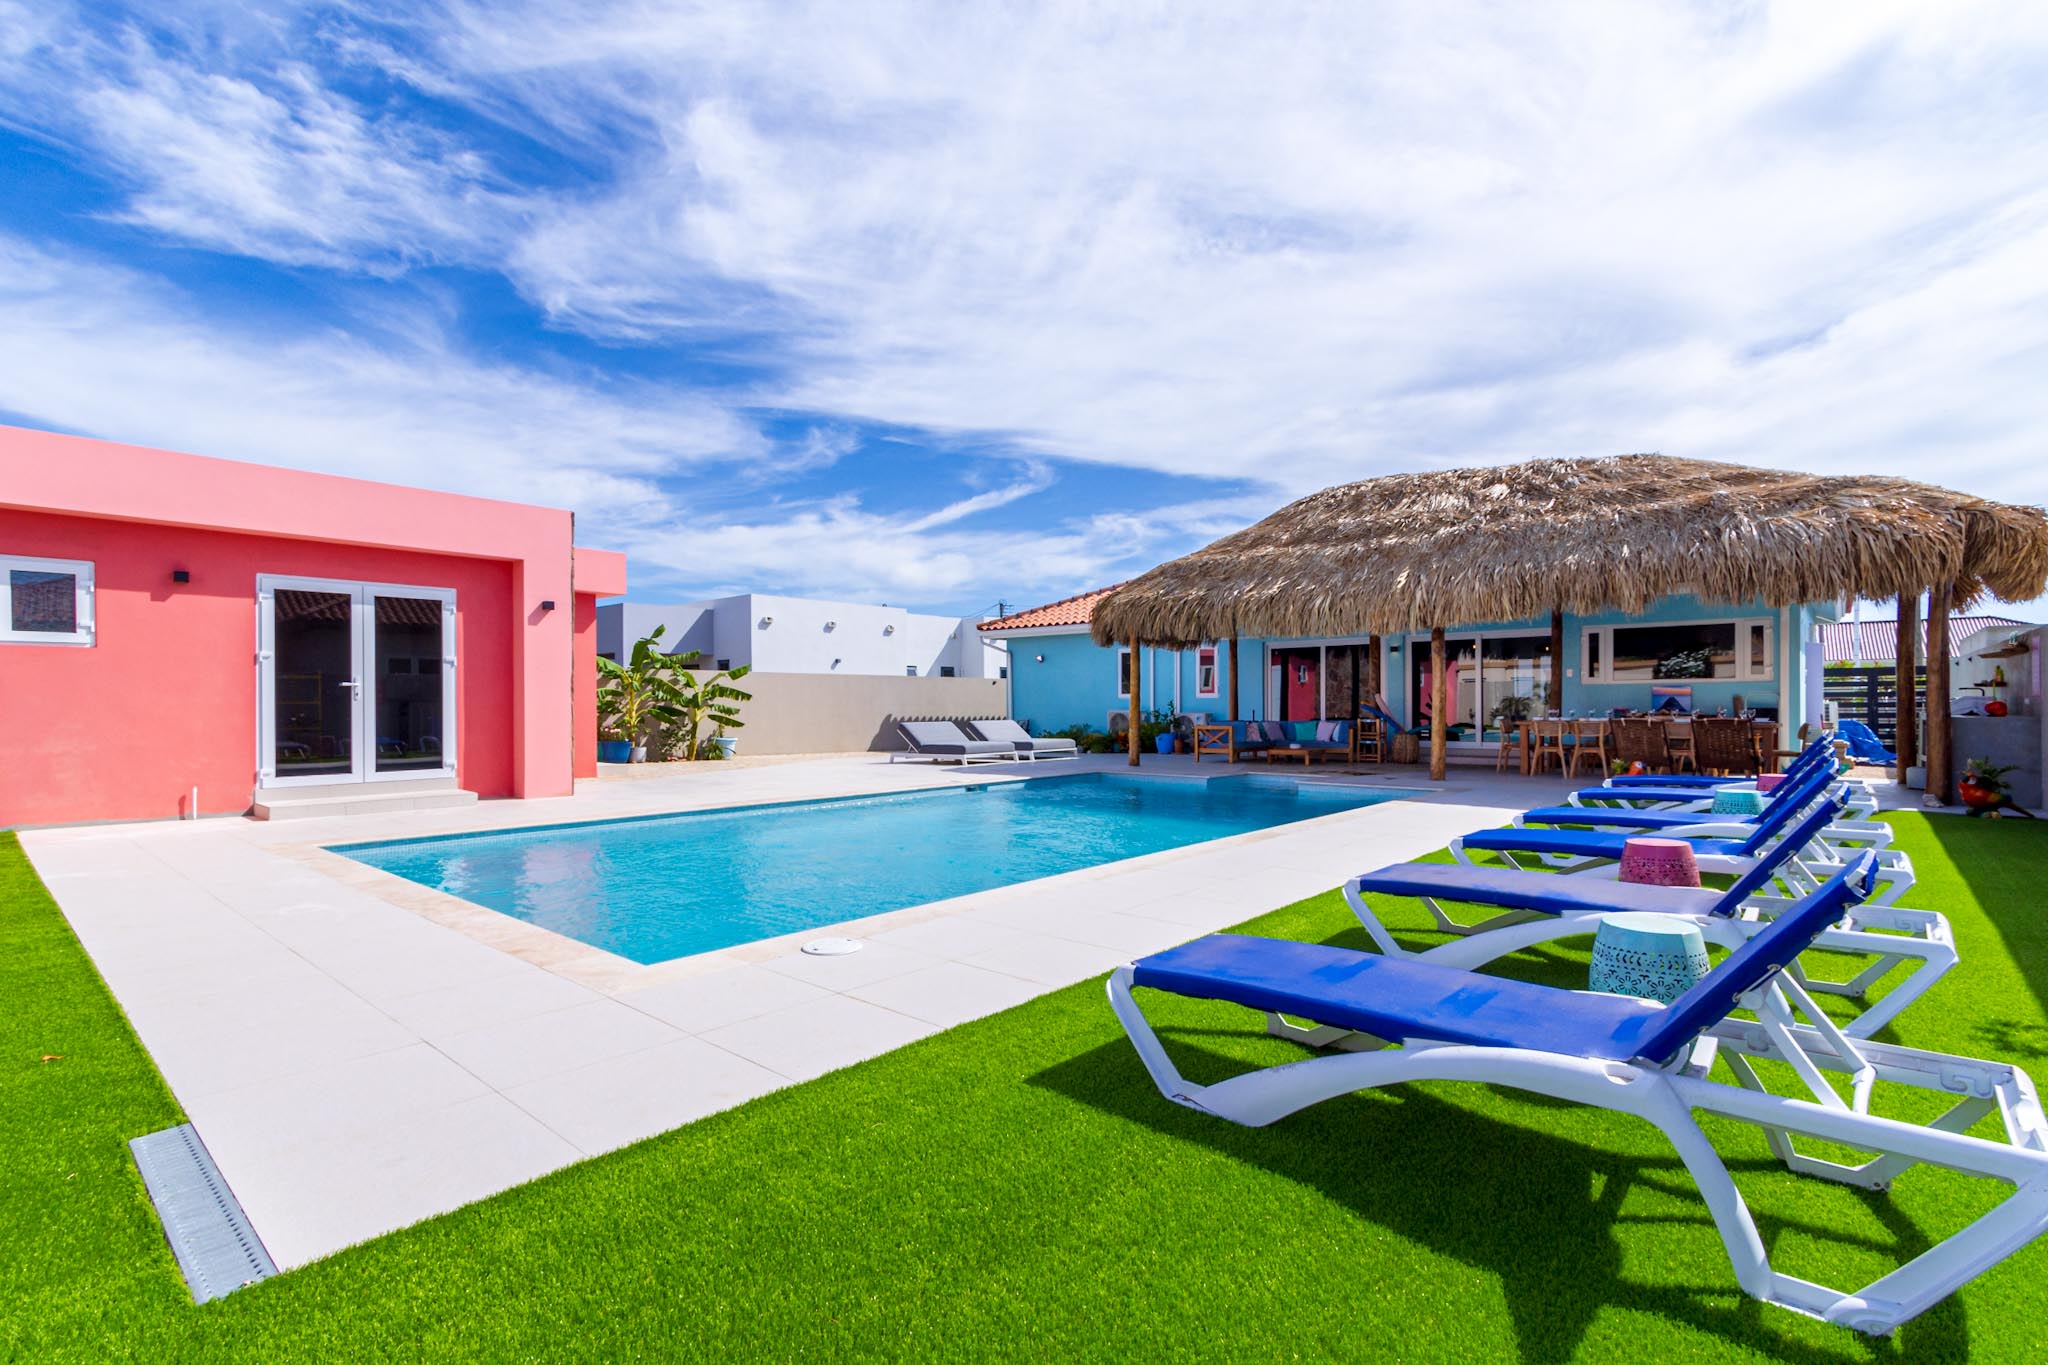 Vibrant Pool Area - feel the warmth of the sun and lie down by the pool